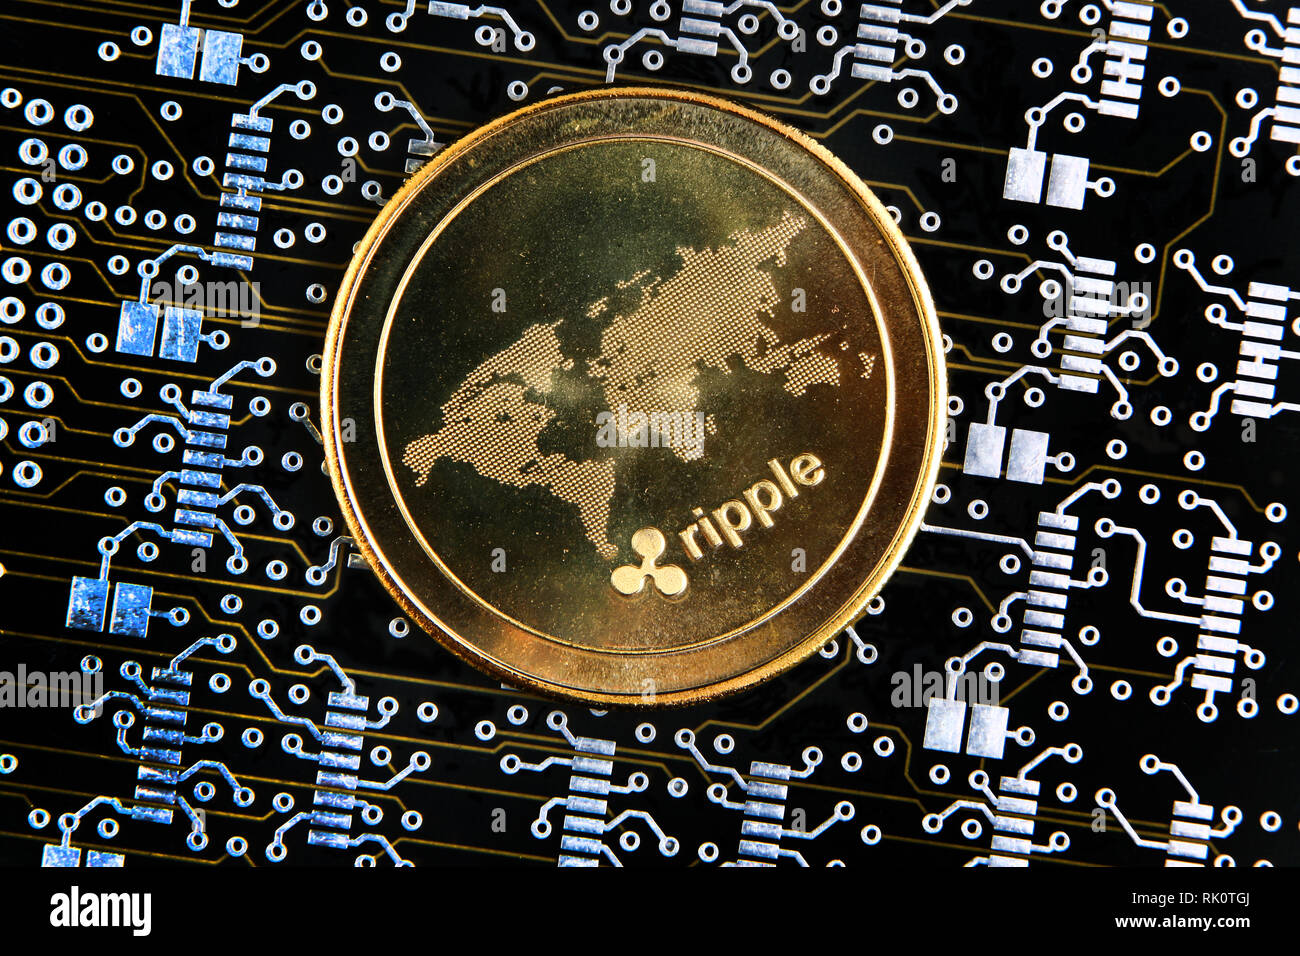 XRP or Ripple gold coin representing cryptocurrencies, against a computer circuit background. Stock Photo